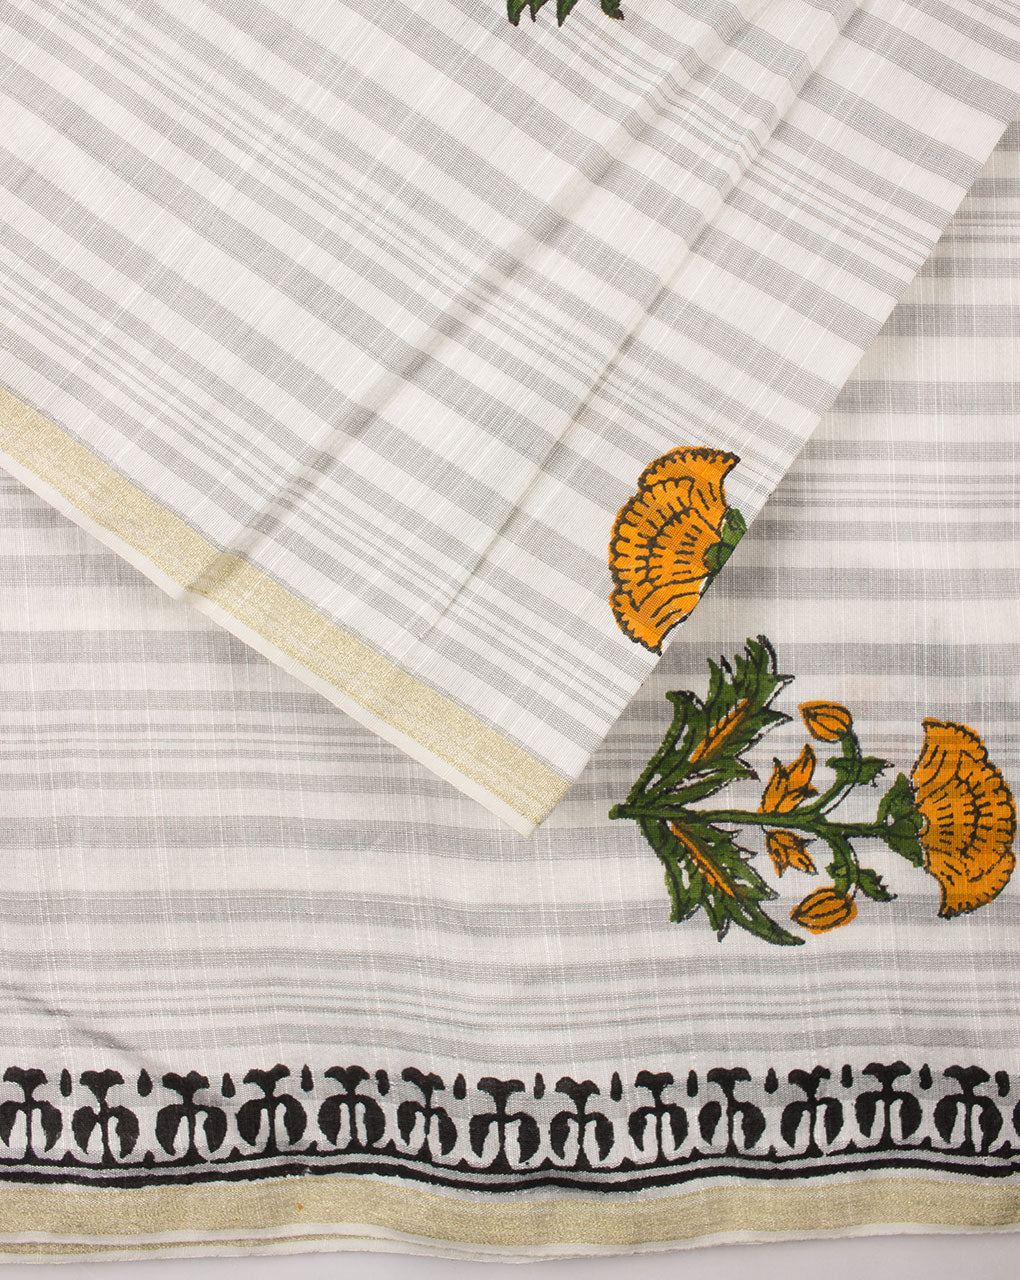 South Chanderi Hand Block Printed Fabric With Border - Fabriclore.com